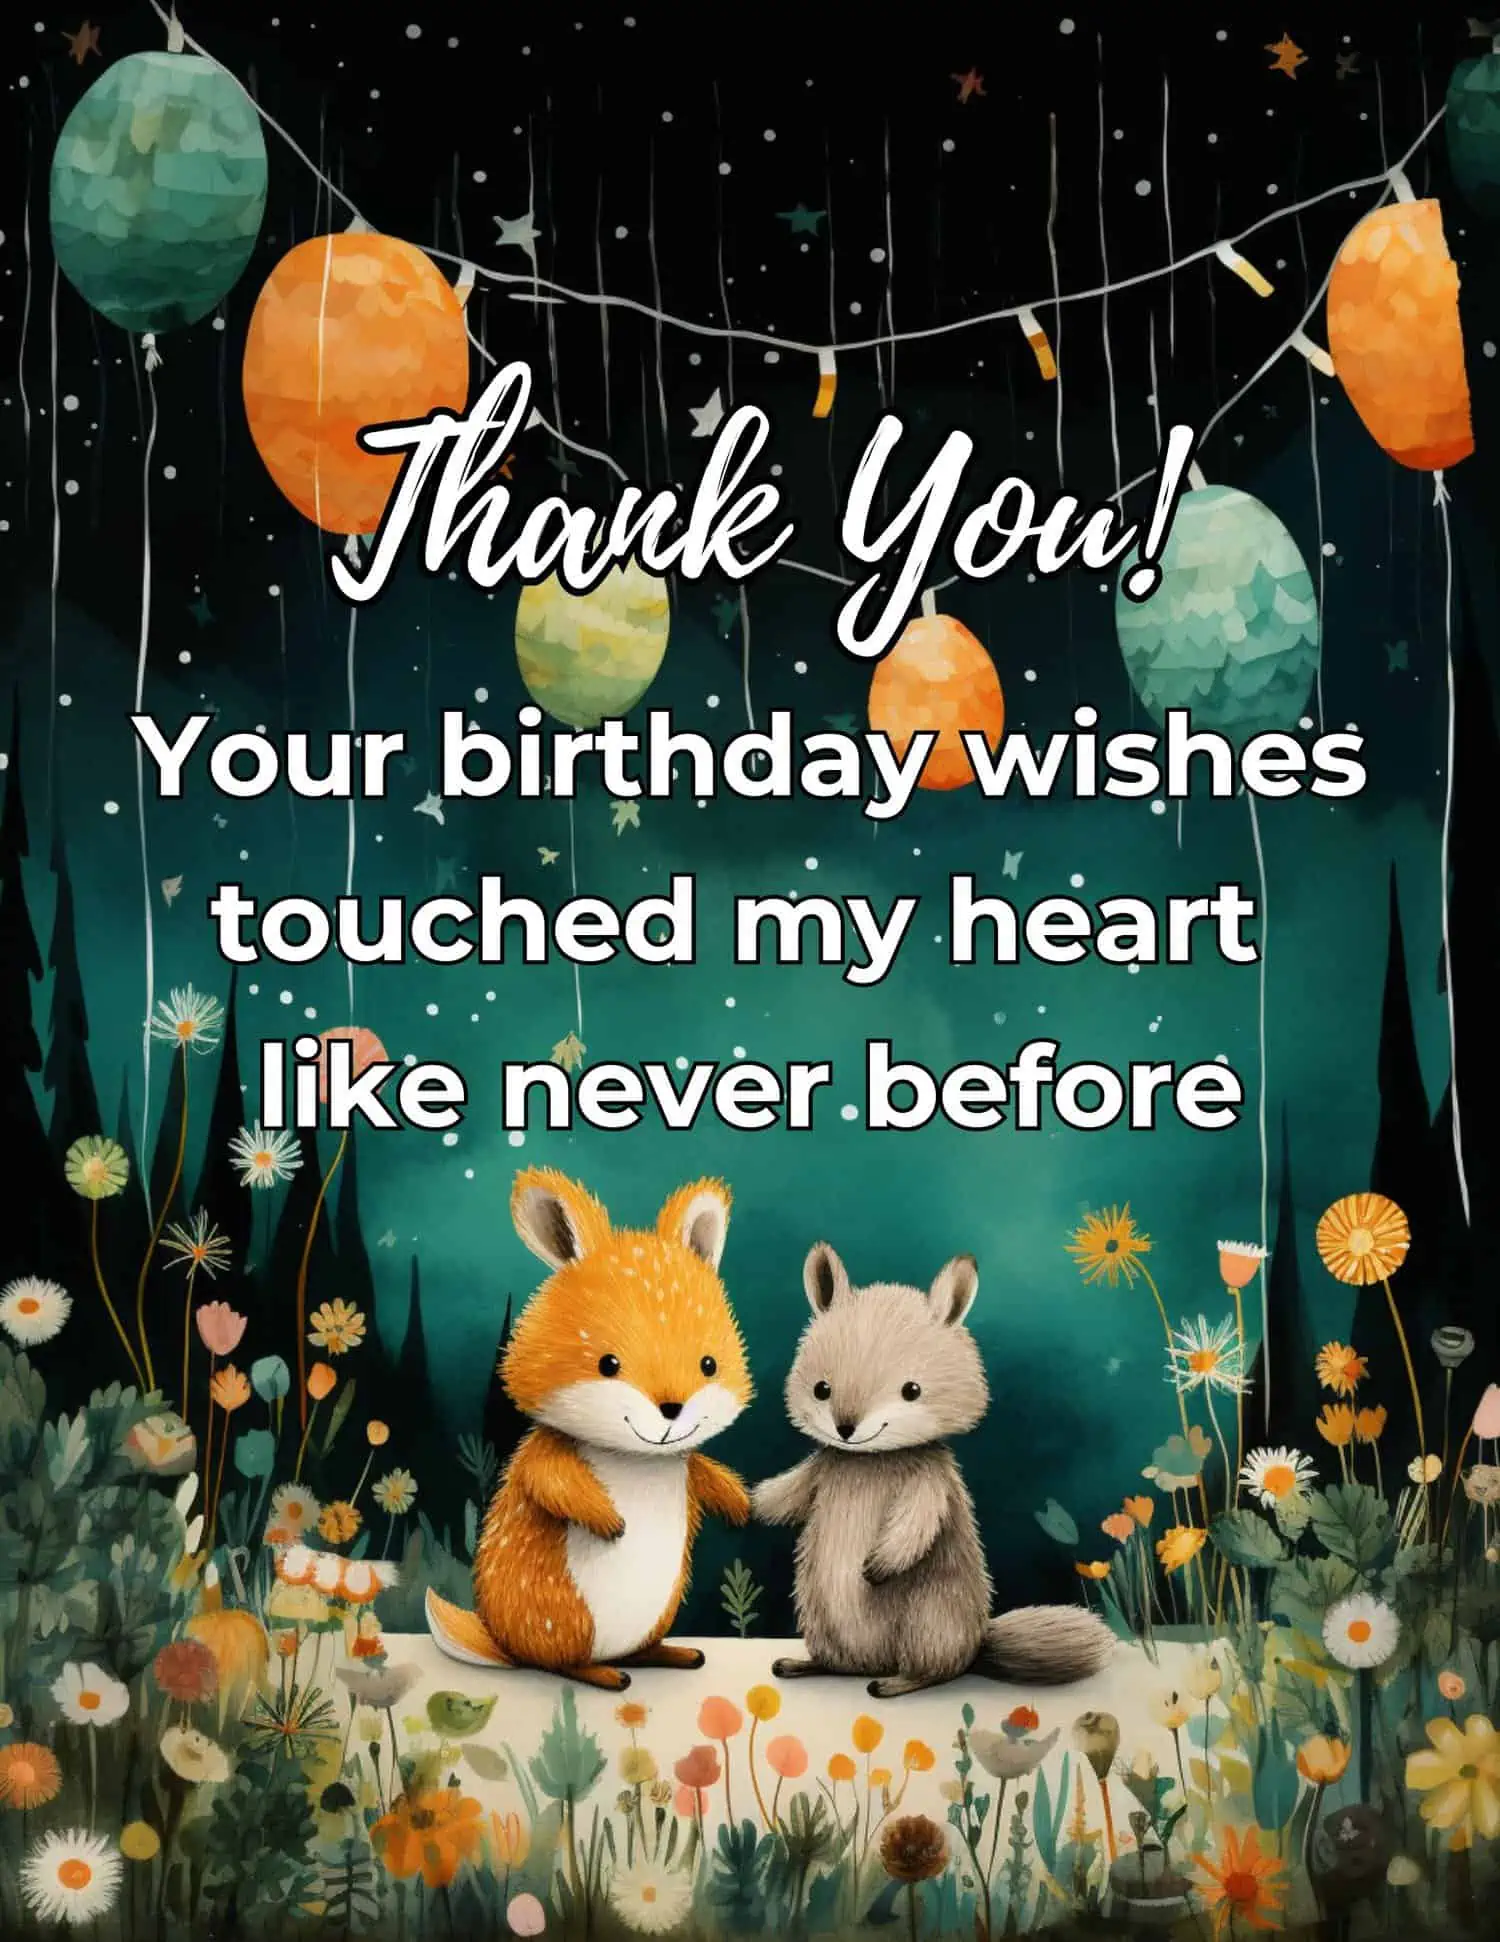 A collection of heartfelt and emotional messages to express profound gratitude for birthday wishes.